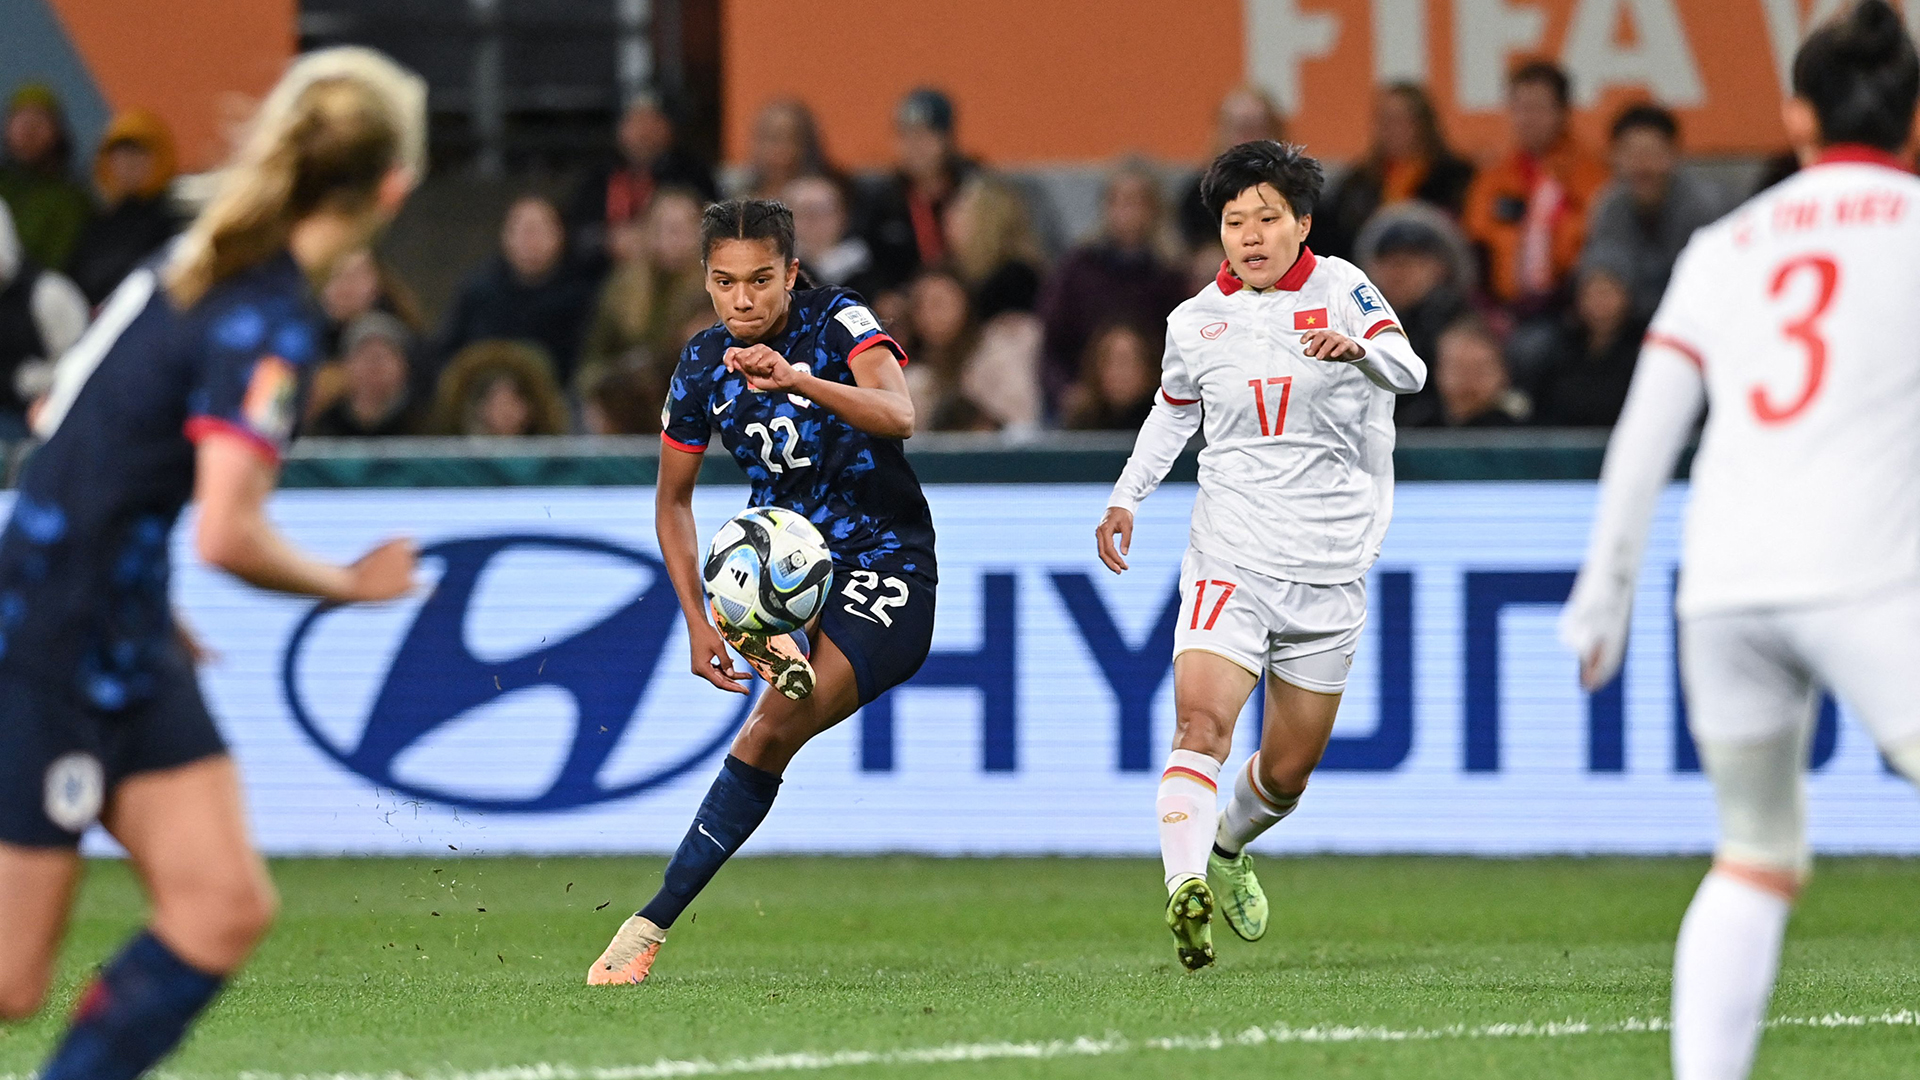 Netherlands' forward #22 Esmee Brugts (centre L) scores her team's sixth goal during the Australia and New Zealand 2023 Women's World Cup Group E football match between Vietnam and the Netherlands at Dunedin Stadium in Dunedin on August 1, 2023.